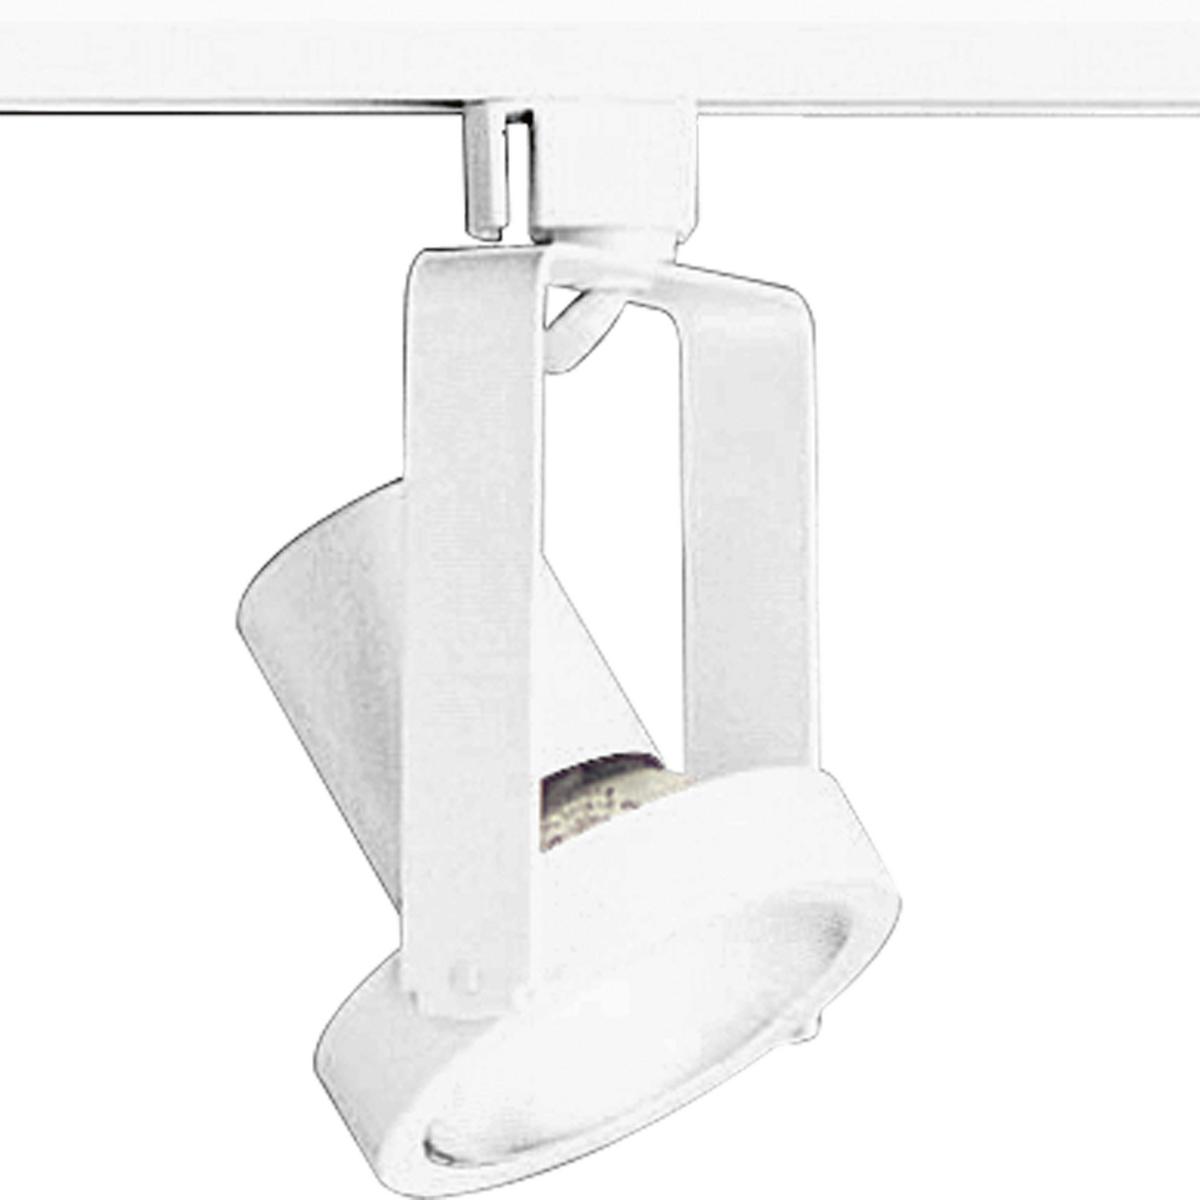 Hubbell P6327-28 White high tech Alpha Trak track head with 360 degree horizontal rotation and 90 degree vertical rotation.  Heads can be easily repositioned on the track to provide lighting in different areas of the room. Excellent for both residential and retail locatio